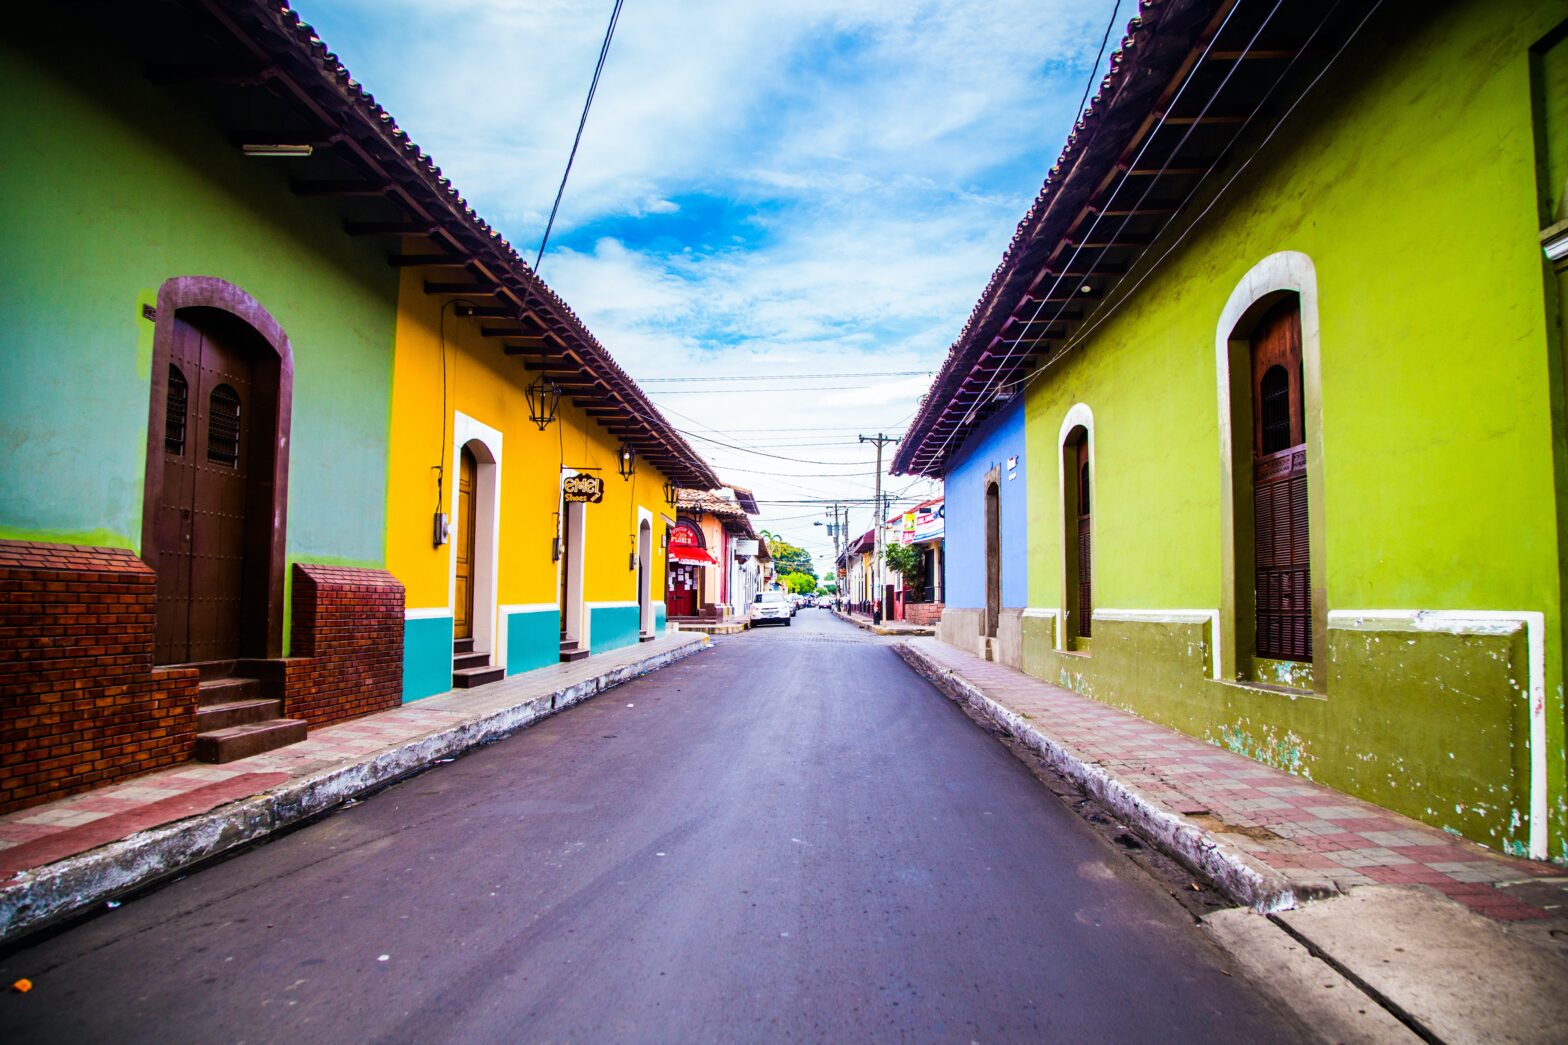 7 Must-See Destinations When Visiting Nicaragua